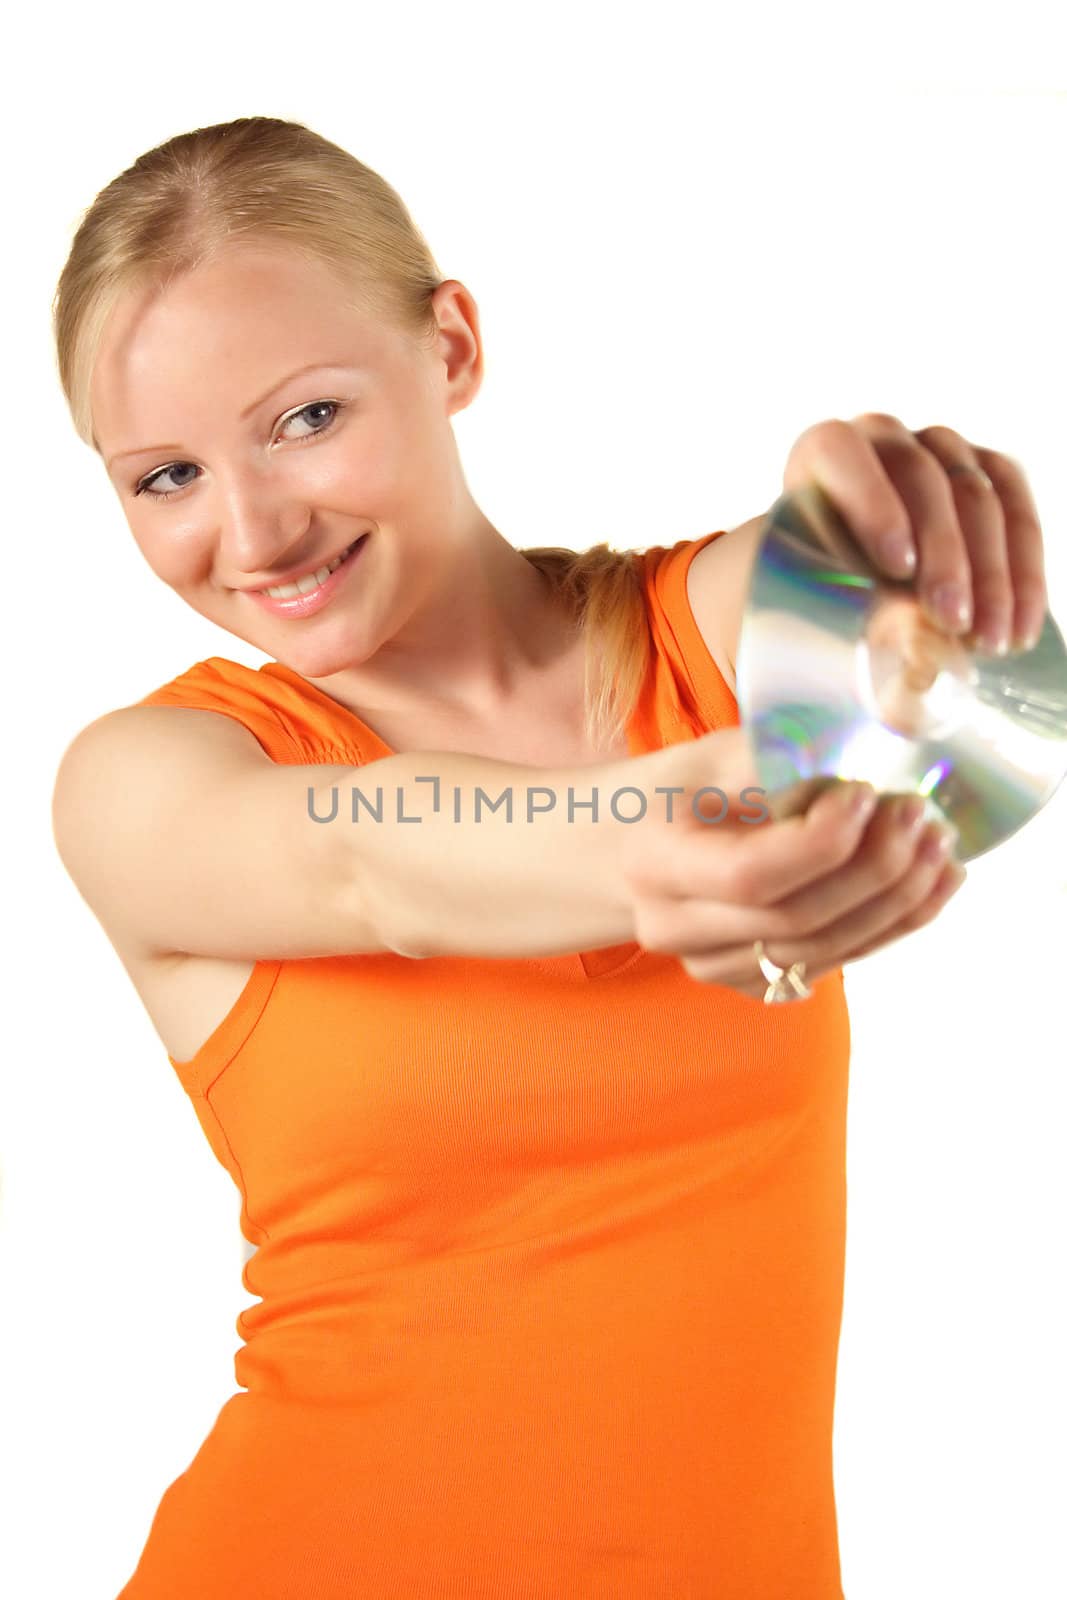 A young handsome woman bending a cd ord dvd. All isolated on white background.